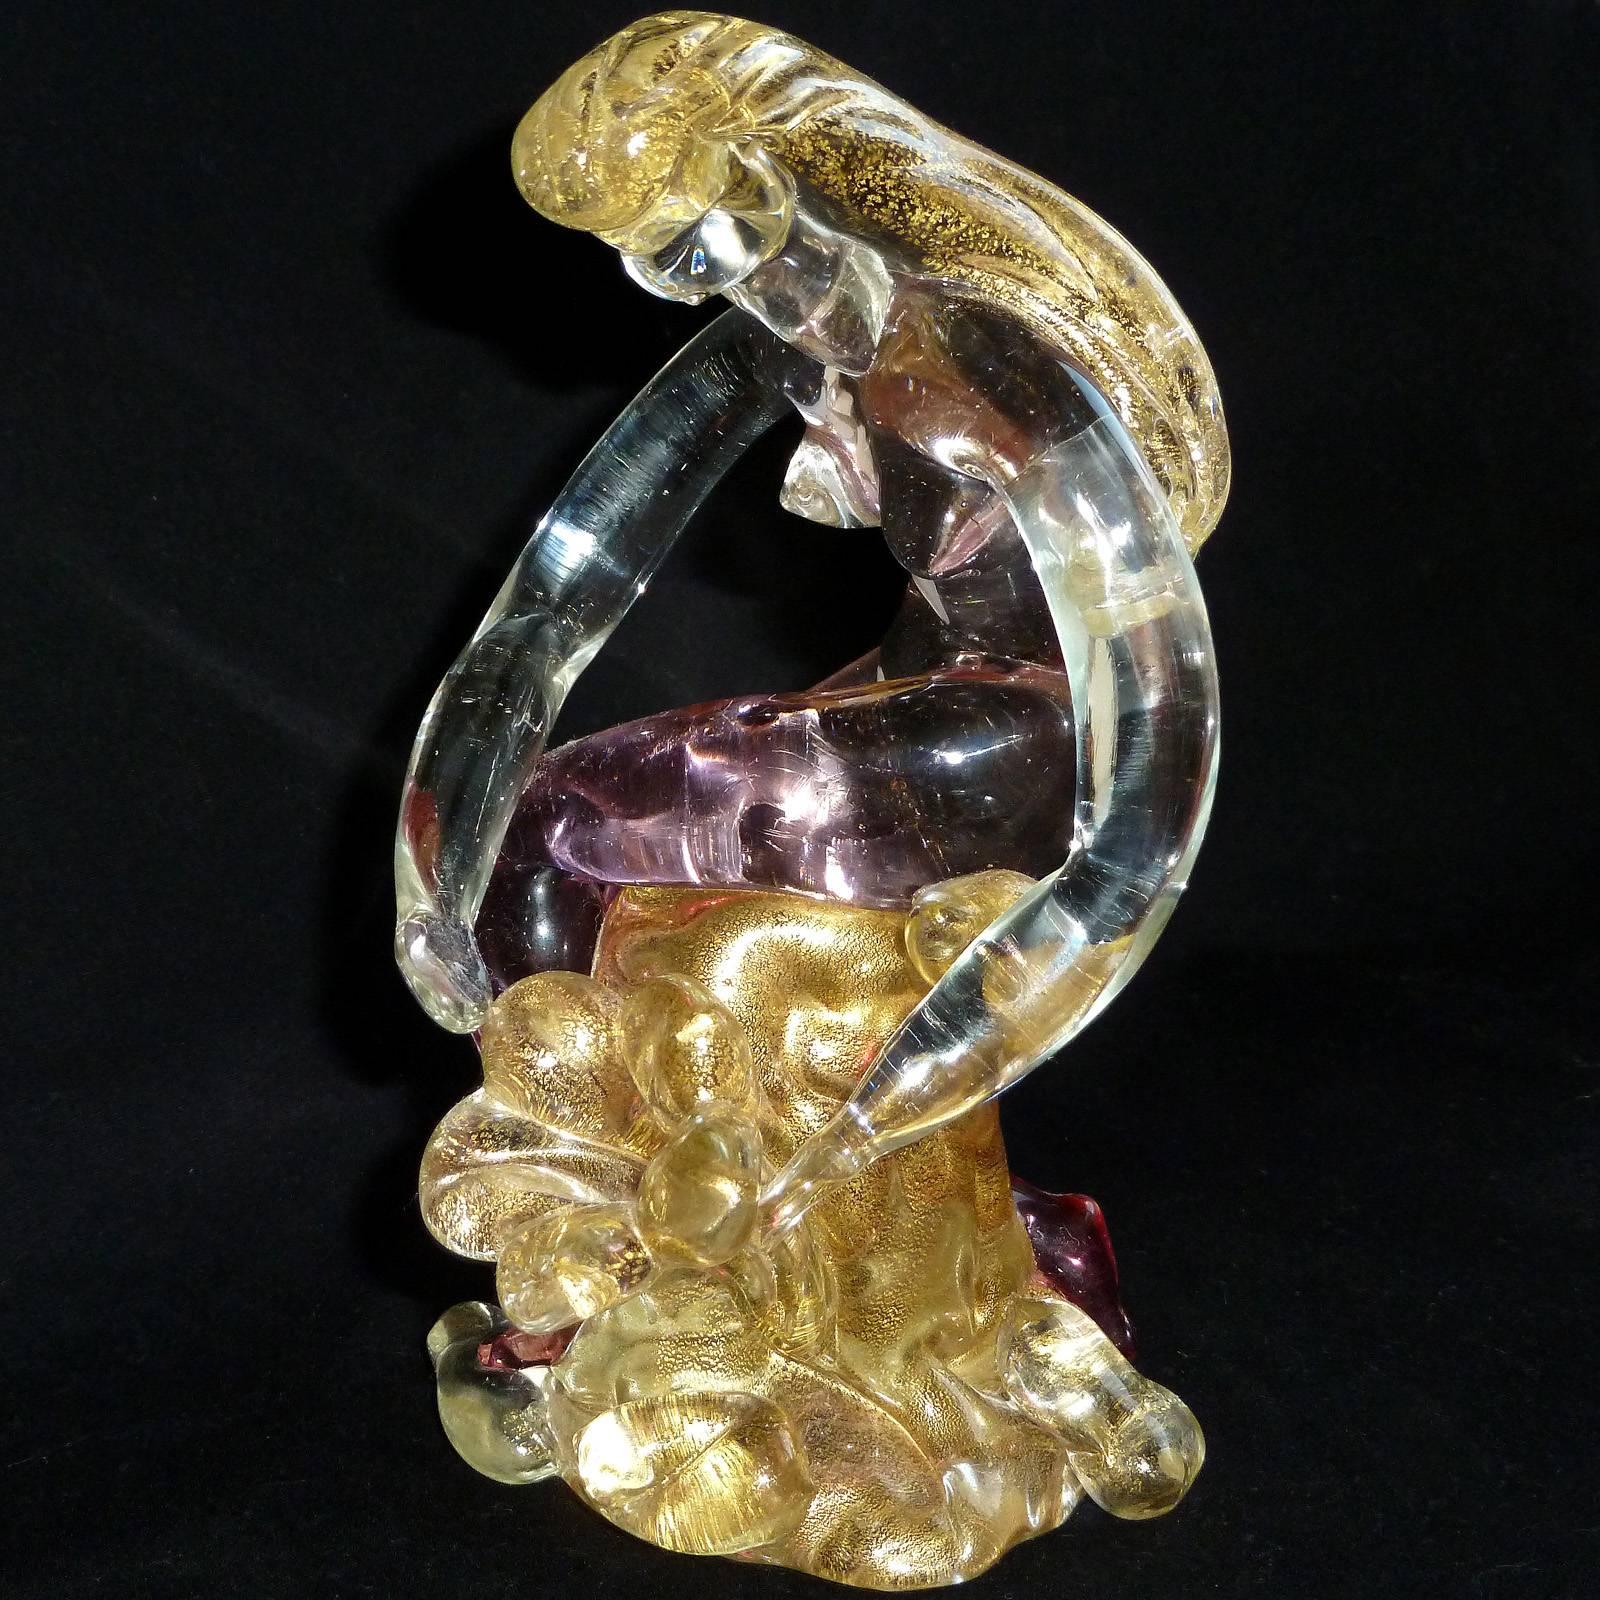 Gorgeous vintage Murano hand blown pink Sommerso and gold flecks Italian art glass nude woman, garden nymph figurine. The woman is tending to a large gold flower. Her body is highly detailed, with gold leaf throughout. Measures: 6 1/4